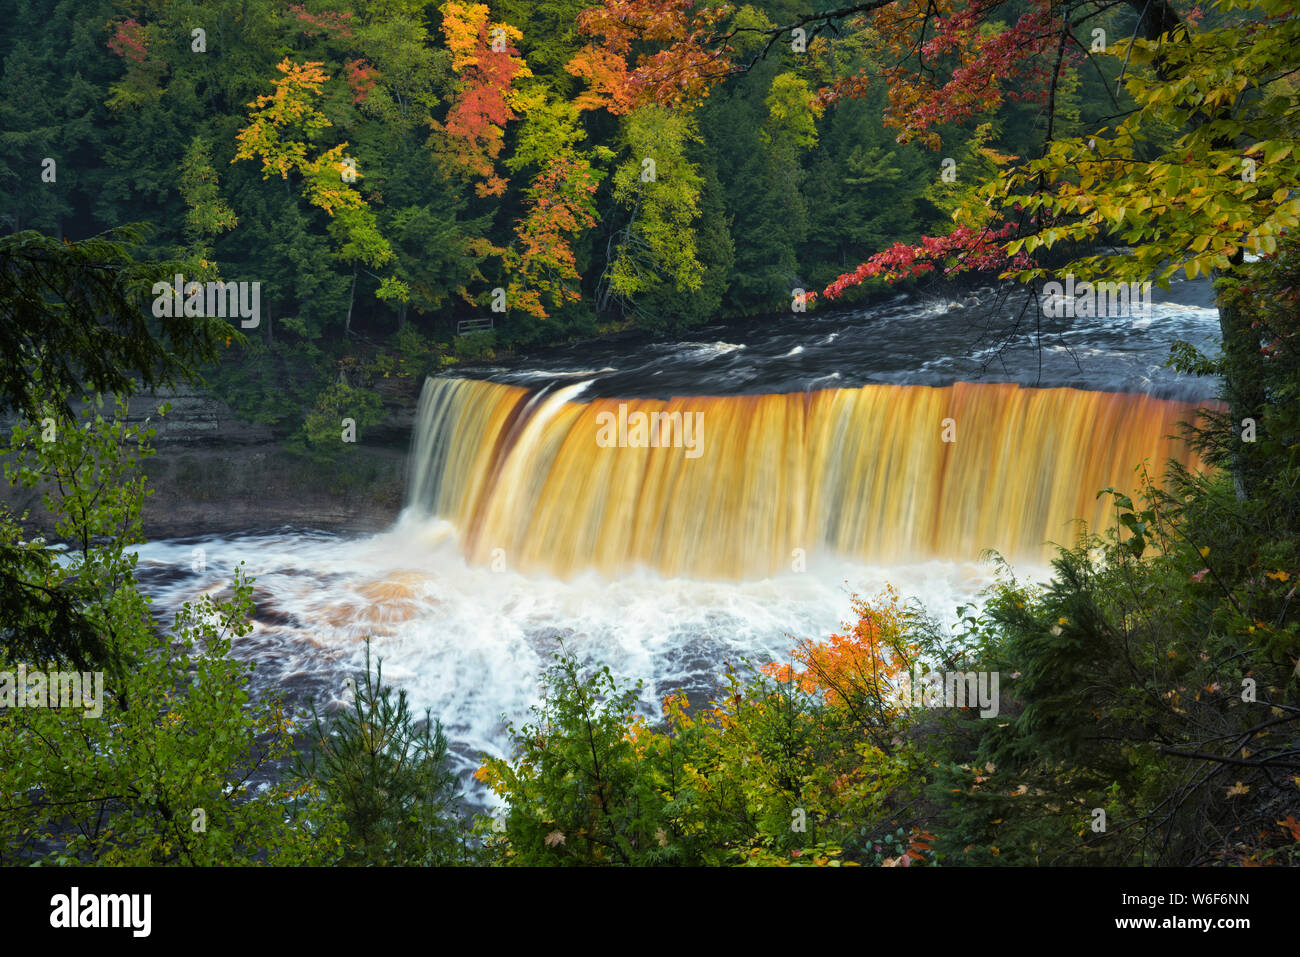 The Tahquemenon River with its amber colored water from naturally occurring tannin found cascades over Tahqemenon Falls in Michigan's Upper Peninsula. Stock Photo